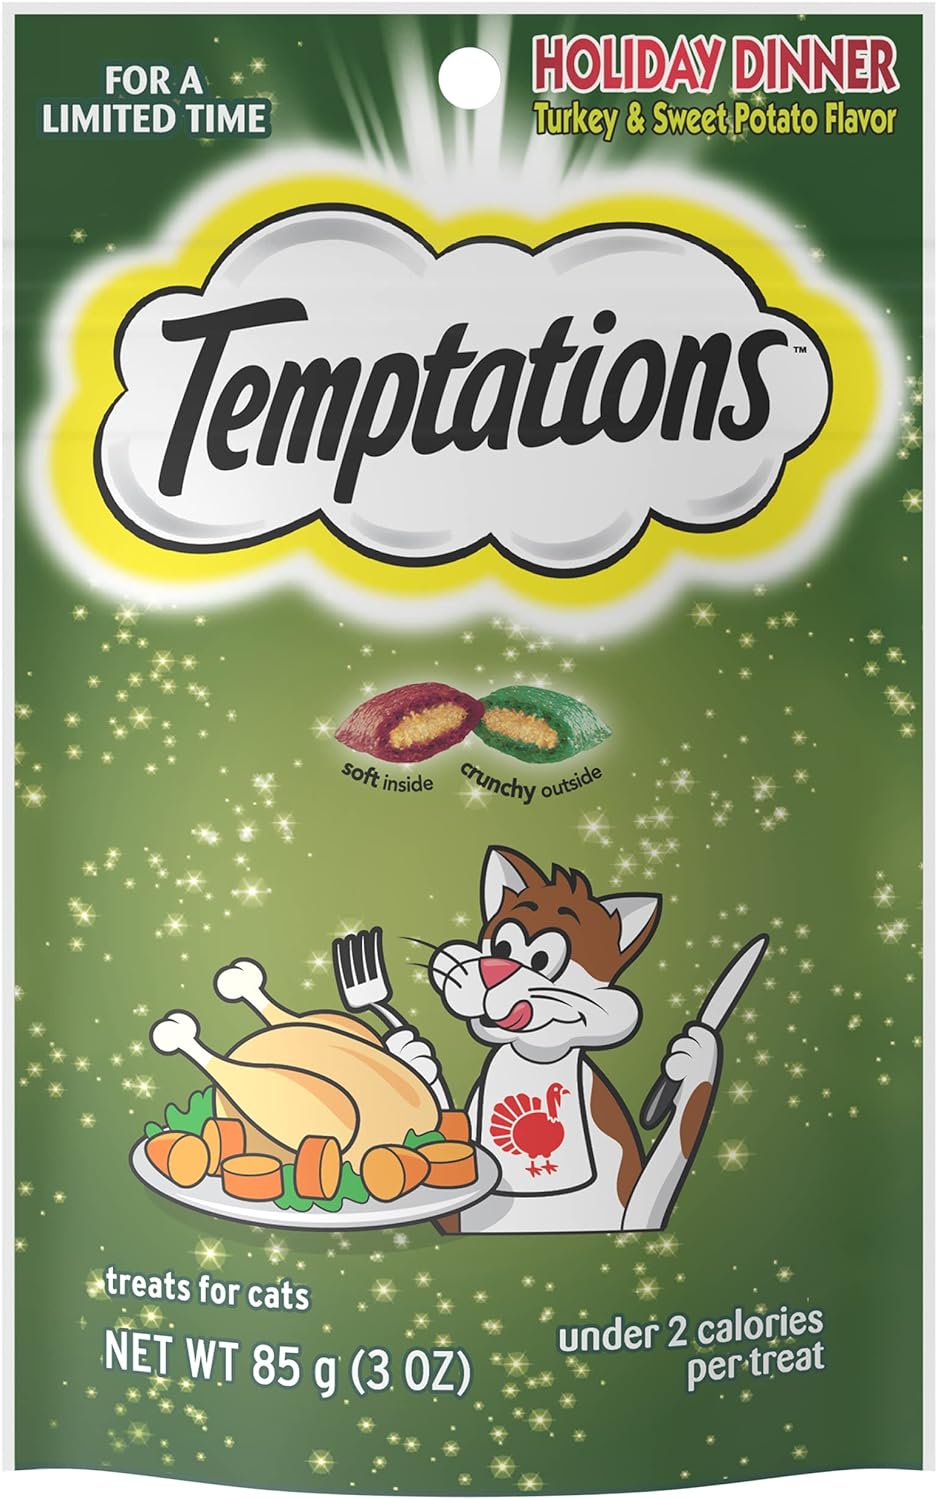 Temptations Classic, Crunchy and Soft Cat Treats, Holiday Dinner Turkey and Sweet Potato Flavor, 3 oz. Pouch